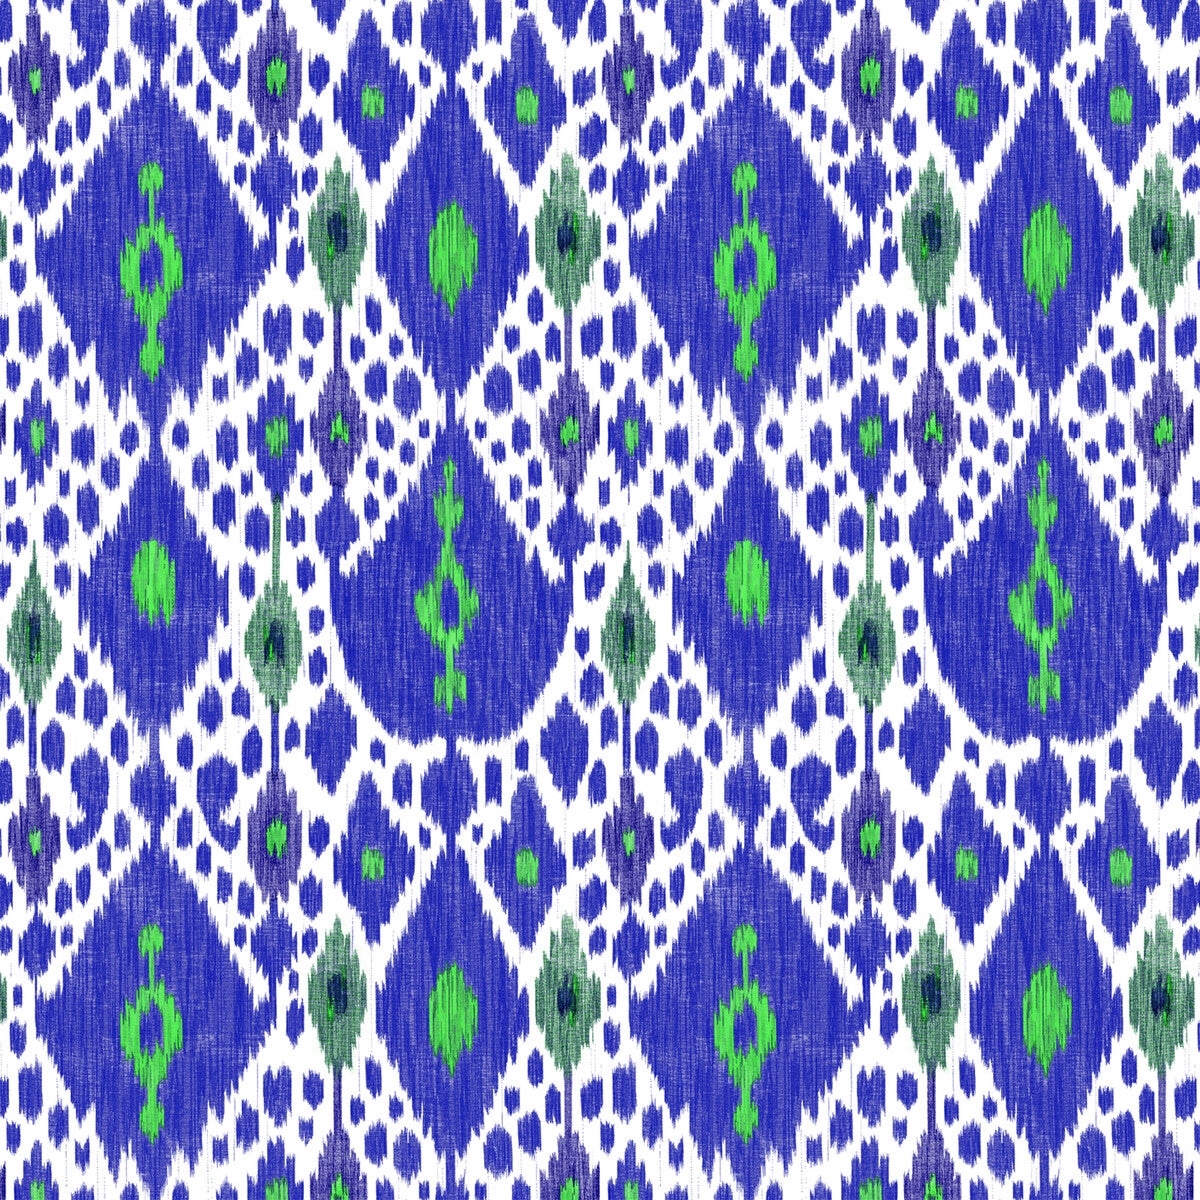 Ikat fabric in azul color - pattern GDT5542.001.0 - by Gaston y Daniela in the Gaston Libreria collection